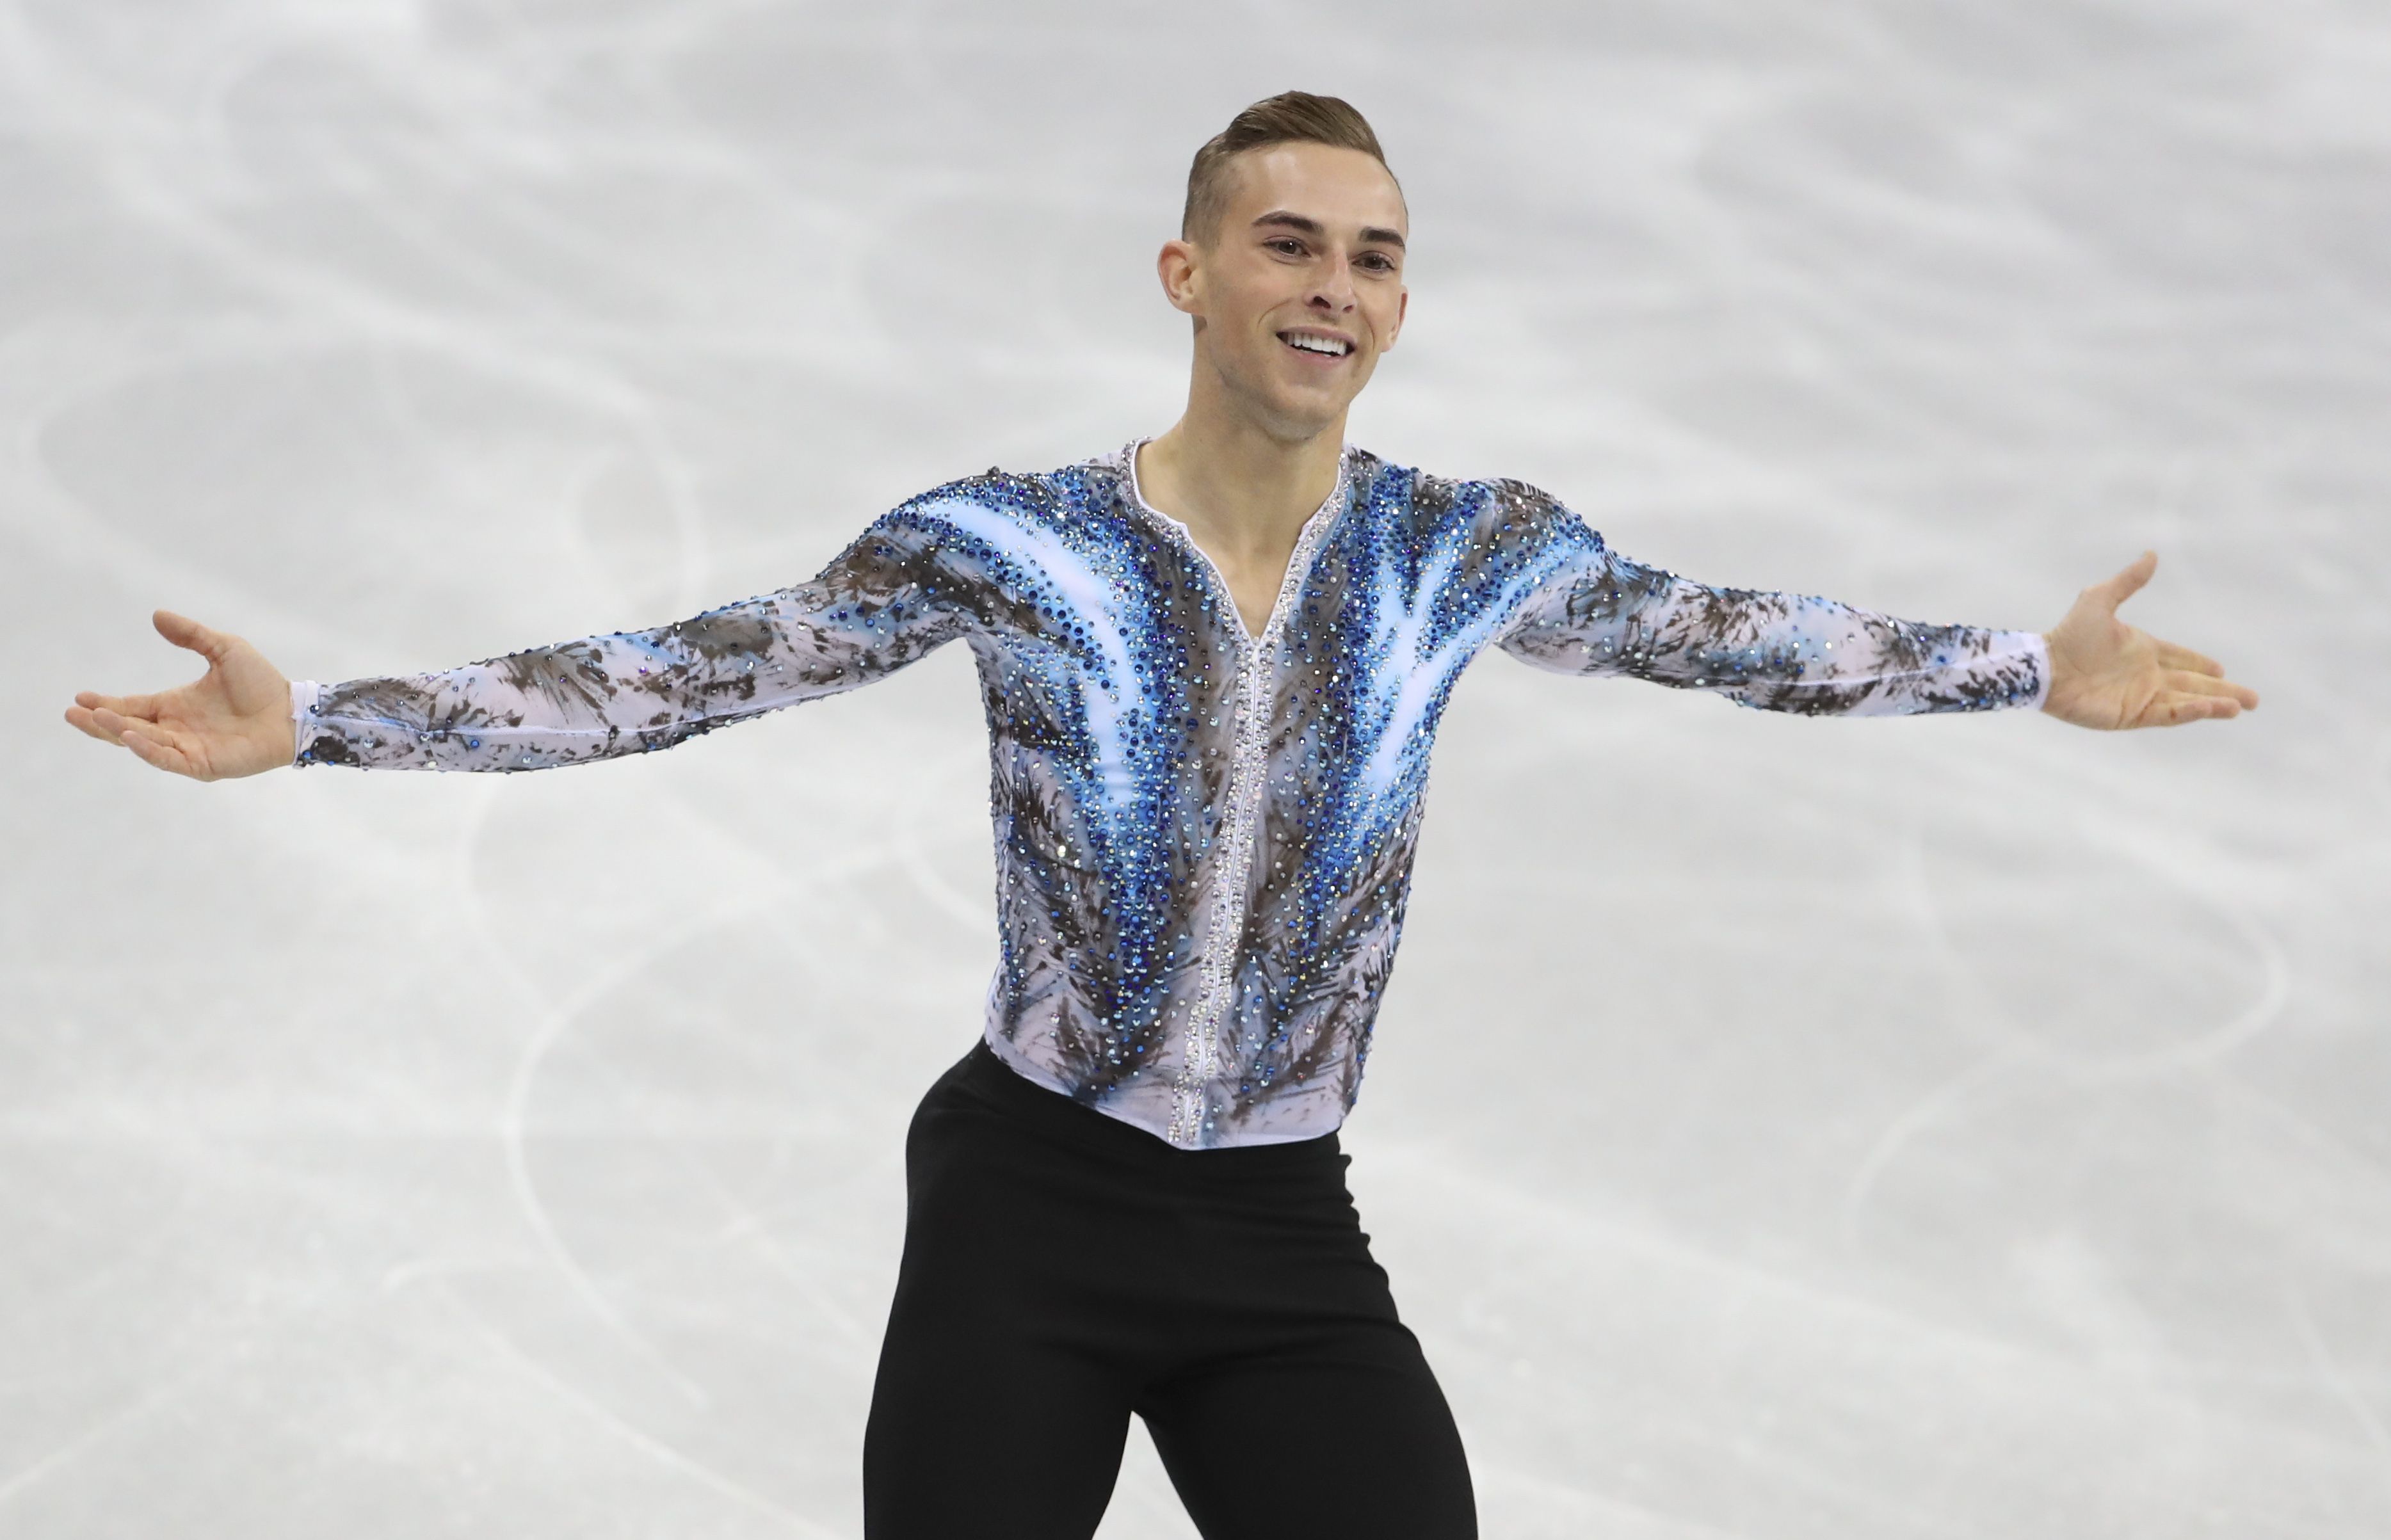 Adam Rippon And Nathan Chen Interview Team Usa Figure Skaters Talk About Winning Medals At Pyeongchang Olympics